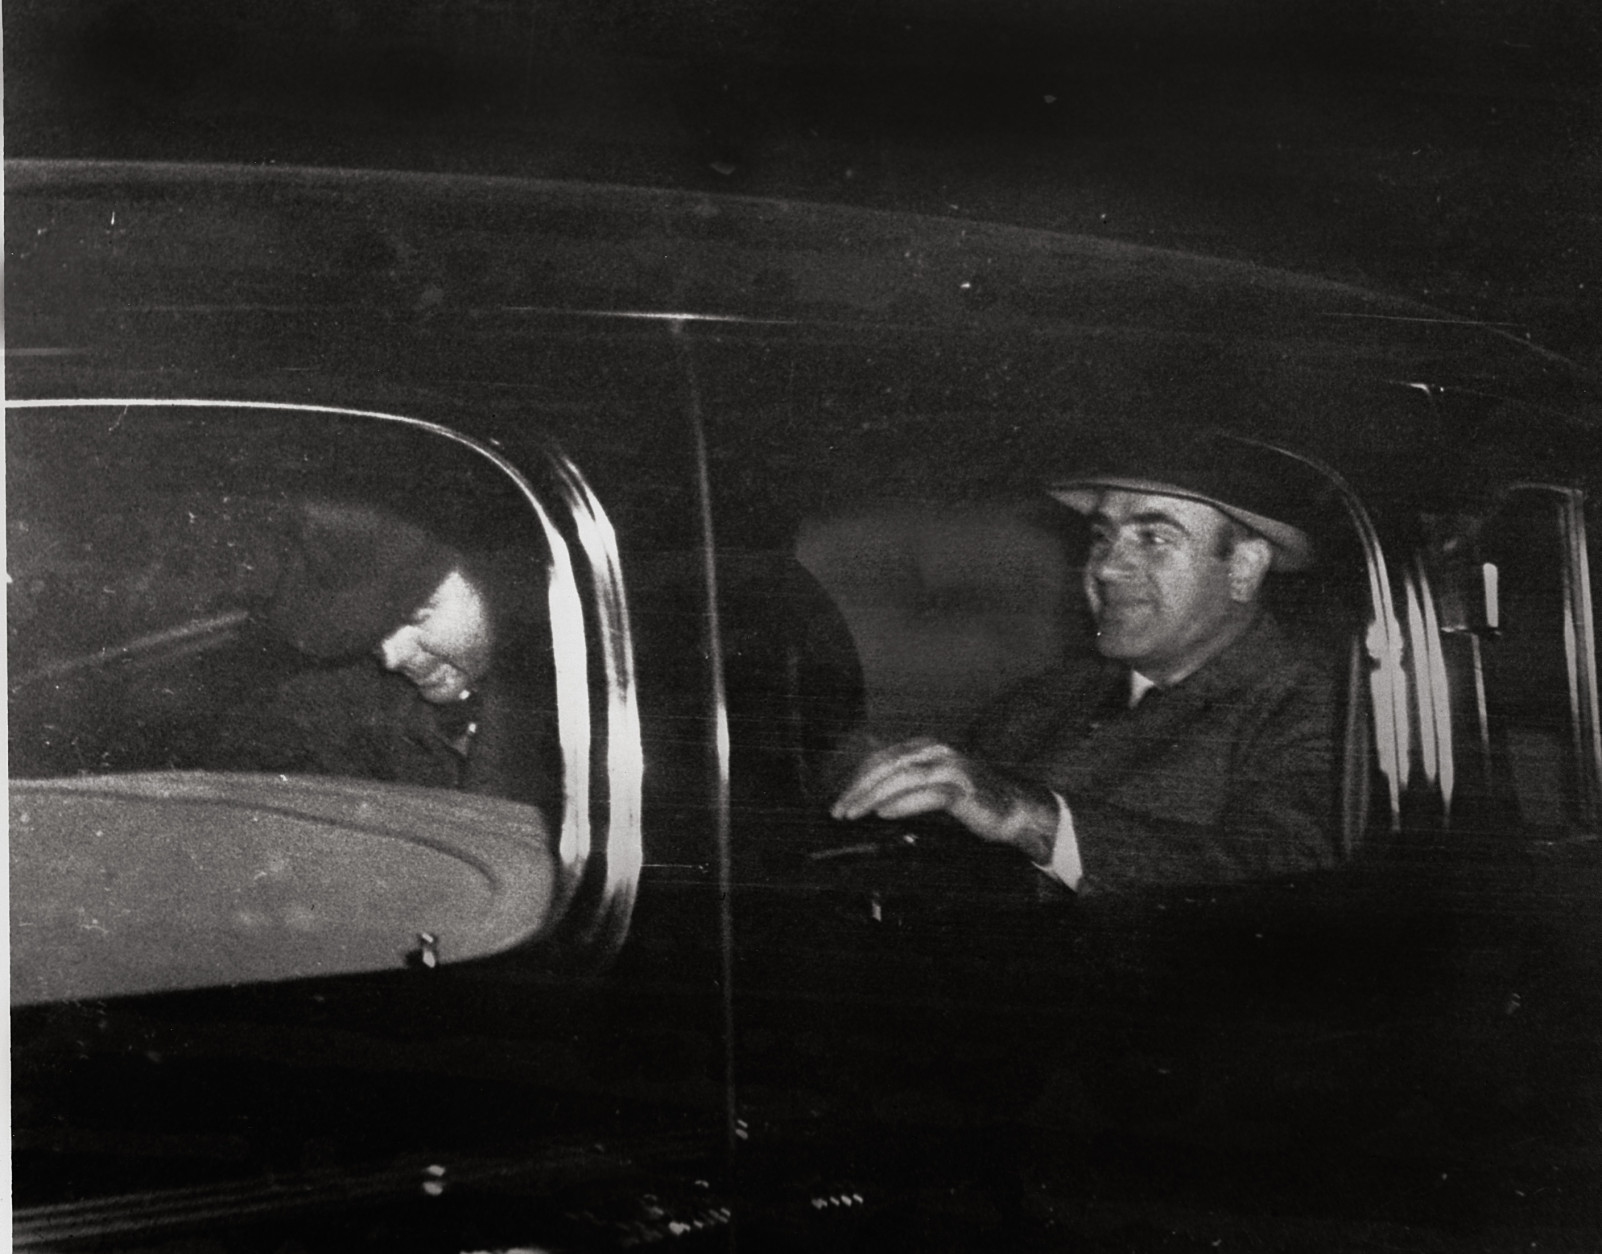 Al Capone, right, Chicago's infamous gang overlord during prohibition, leaves Harrisburg, Pa., on Nov. 16, 1939 with a federal officer for Lewisburg, Pa., where he was released after spending seven years in prison in Atlanta and San Francisco's Alcatraz.   (AP Photo)